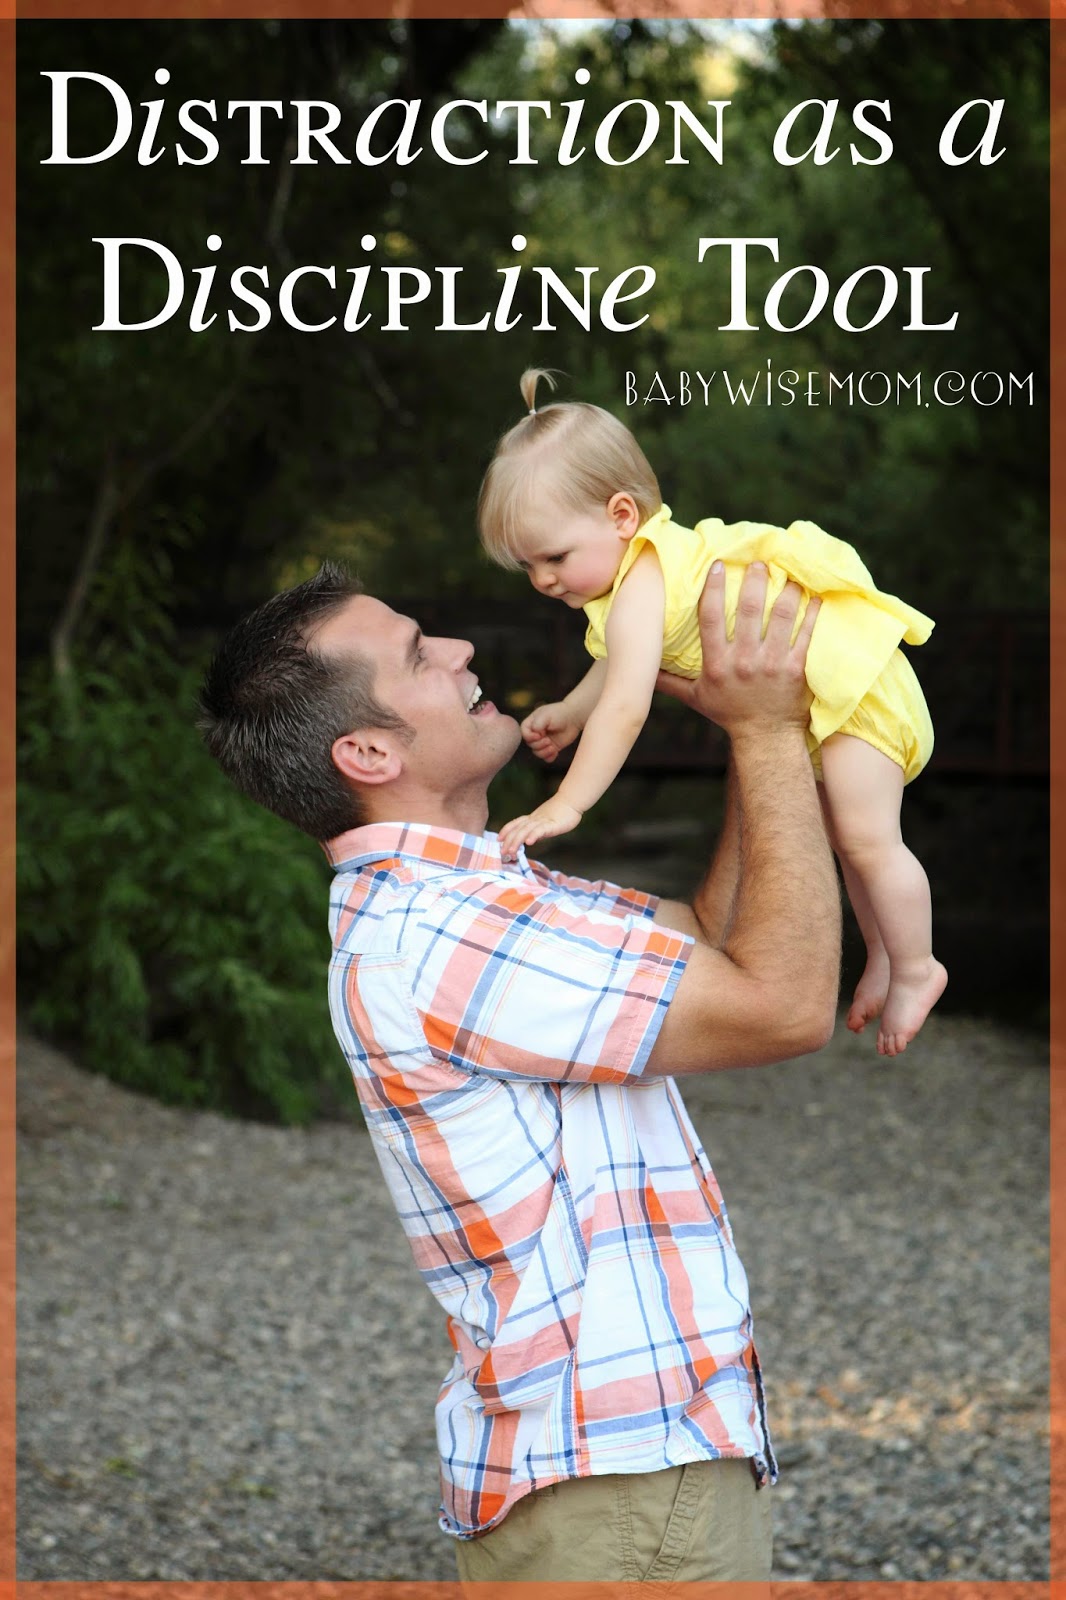  Distraction as a Discipline Tool - click to read